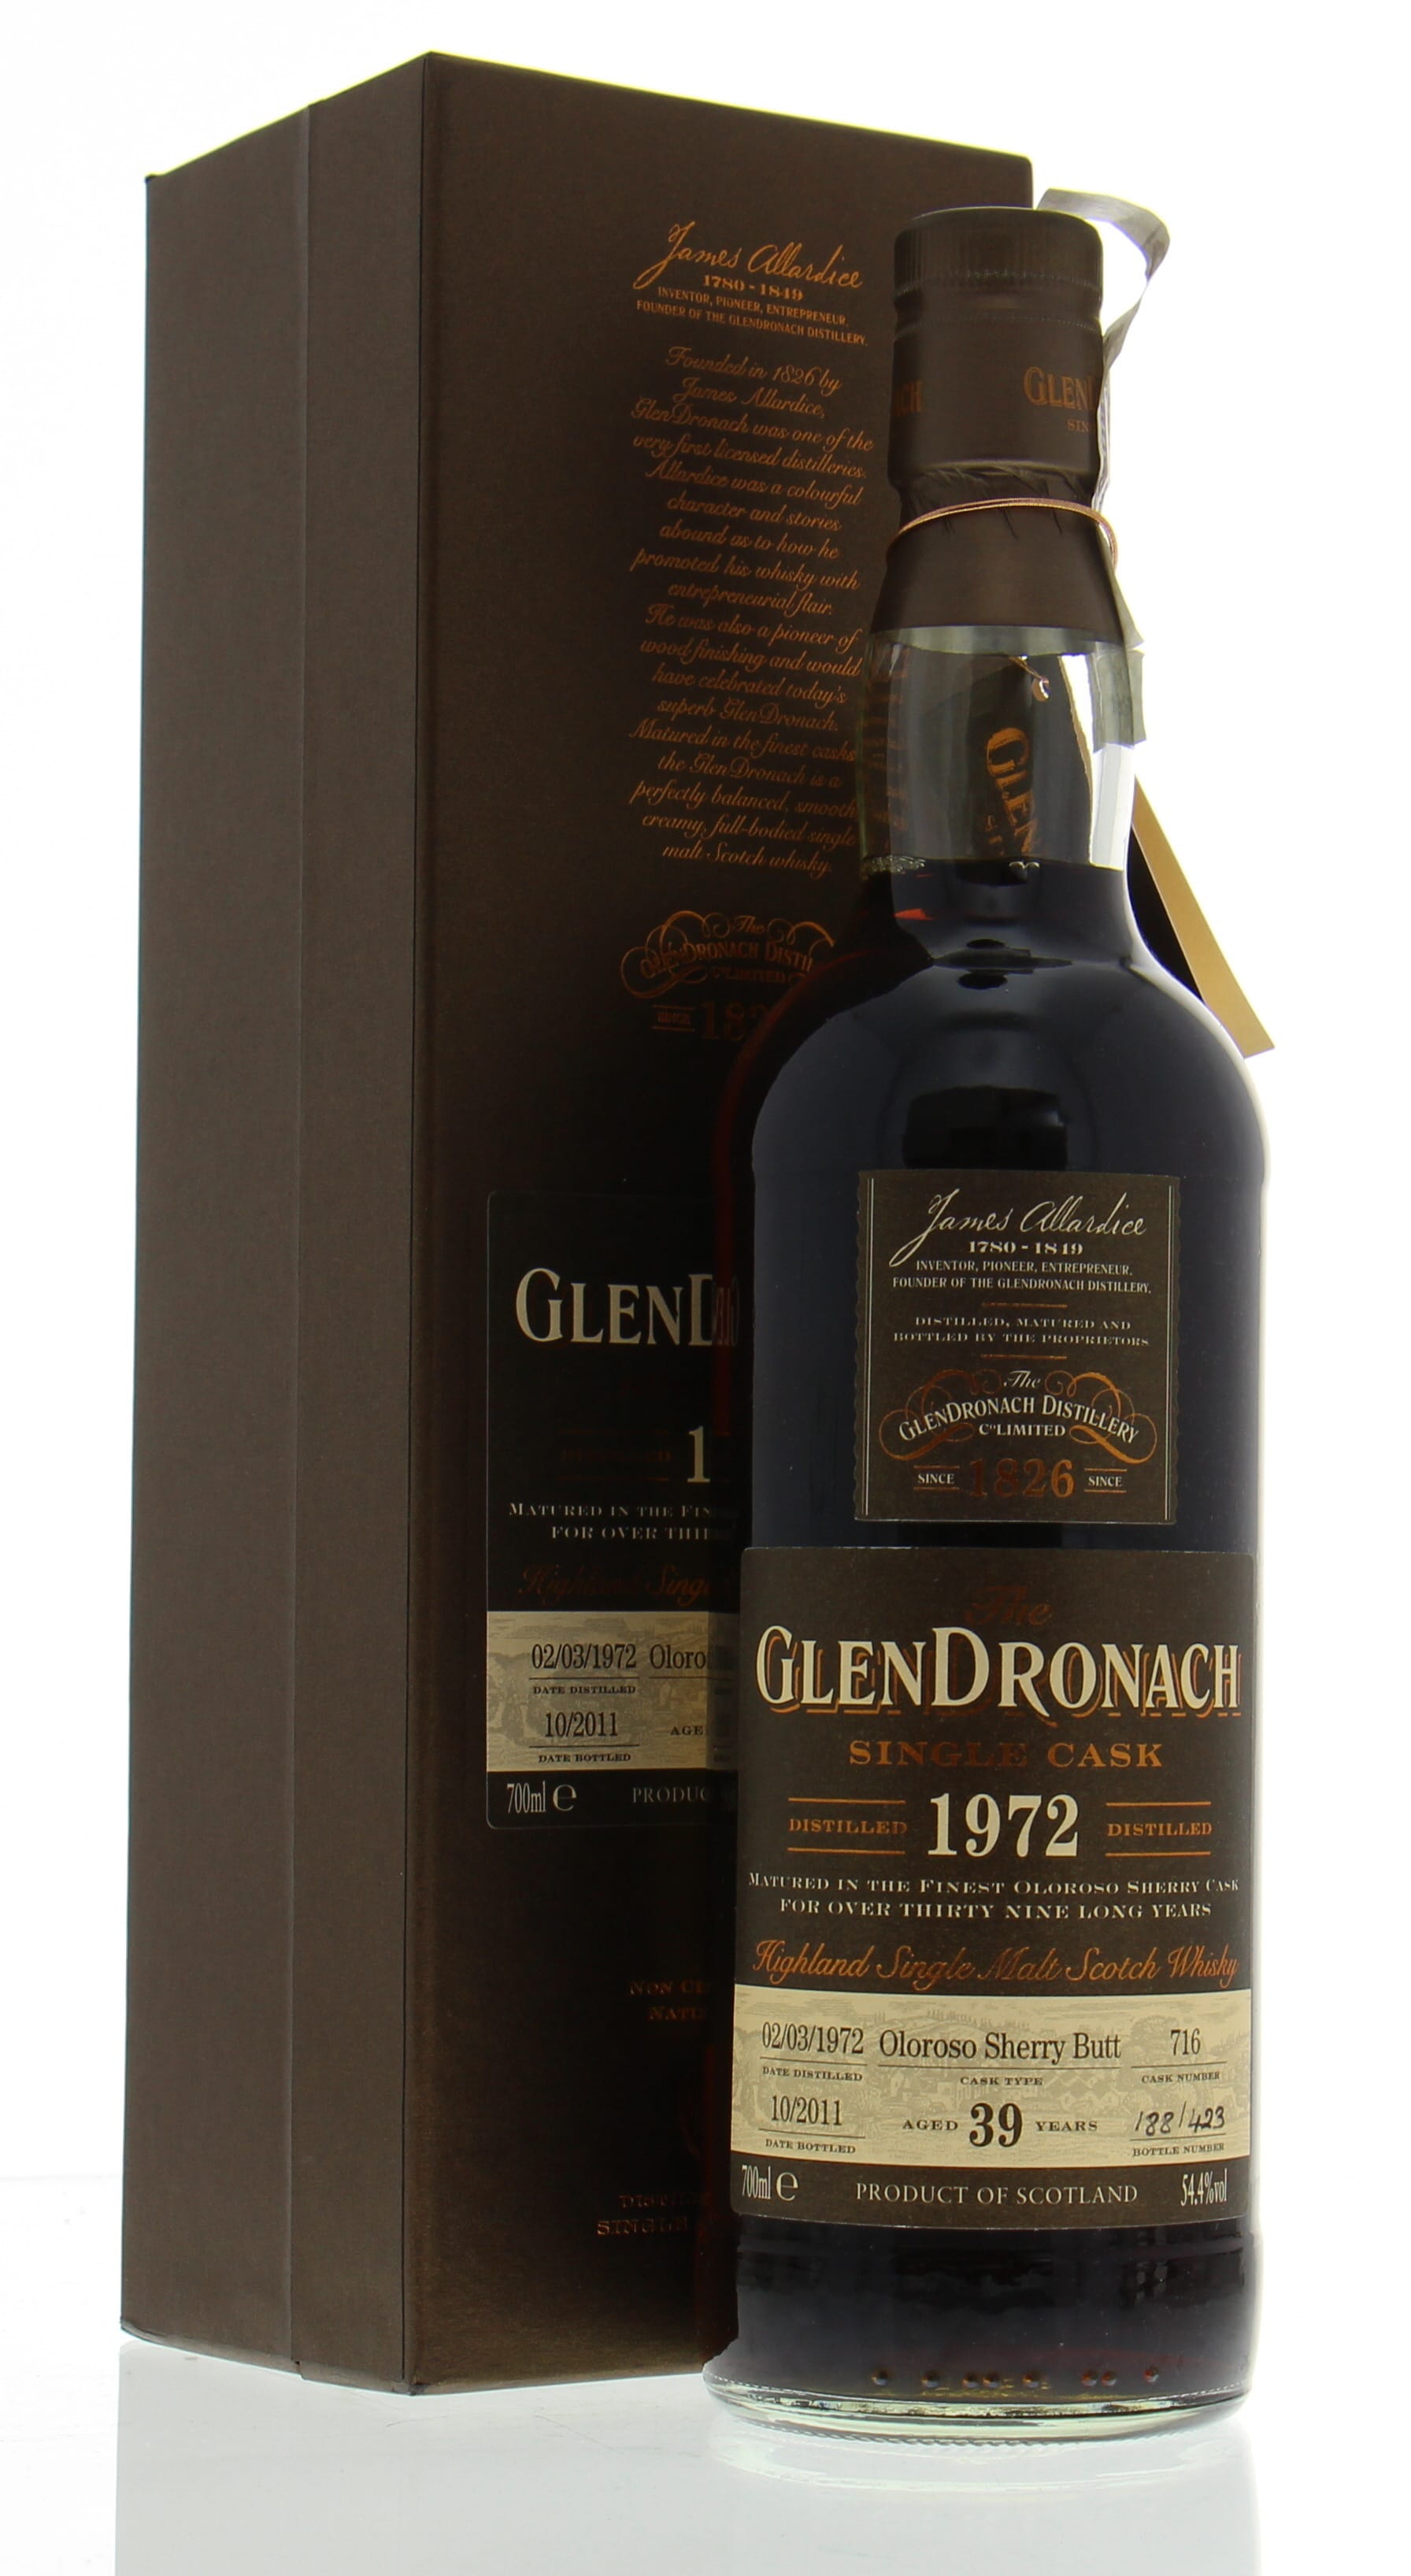 Glendronach - 39 Years Old Batch 5 Cask:716 54.4% 1972 In Original Container